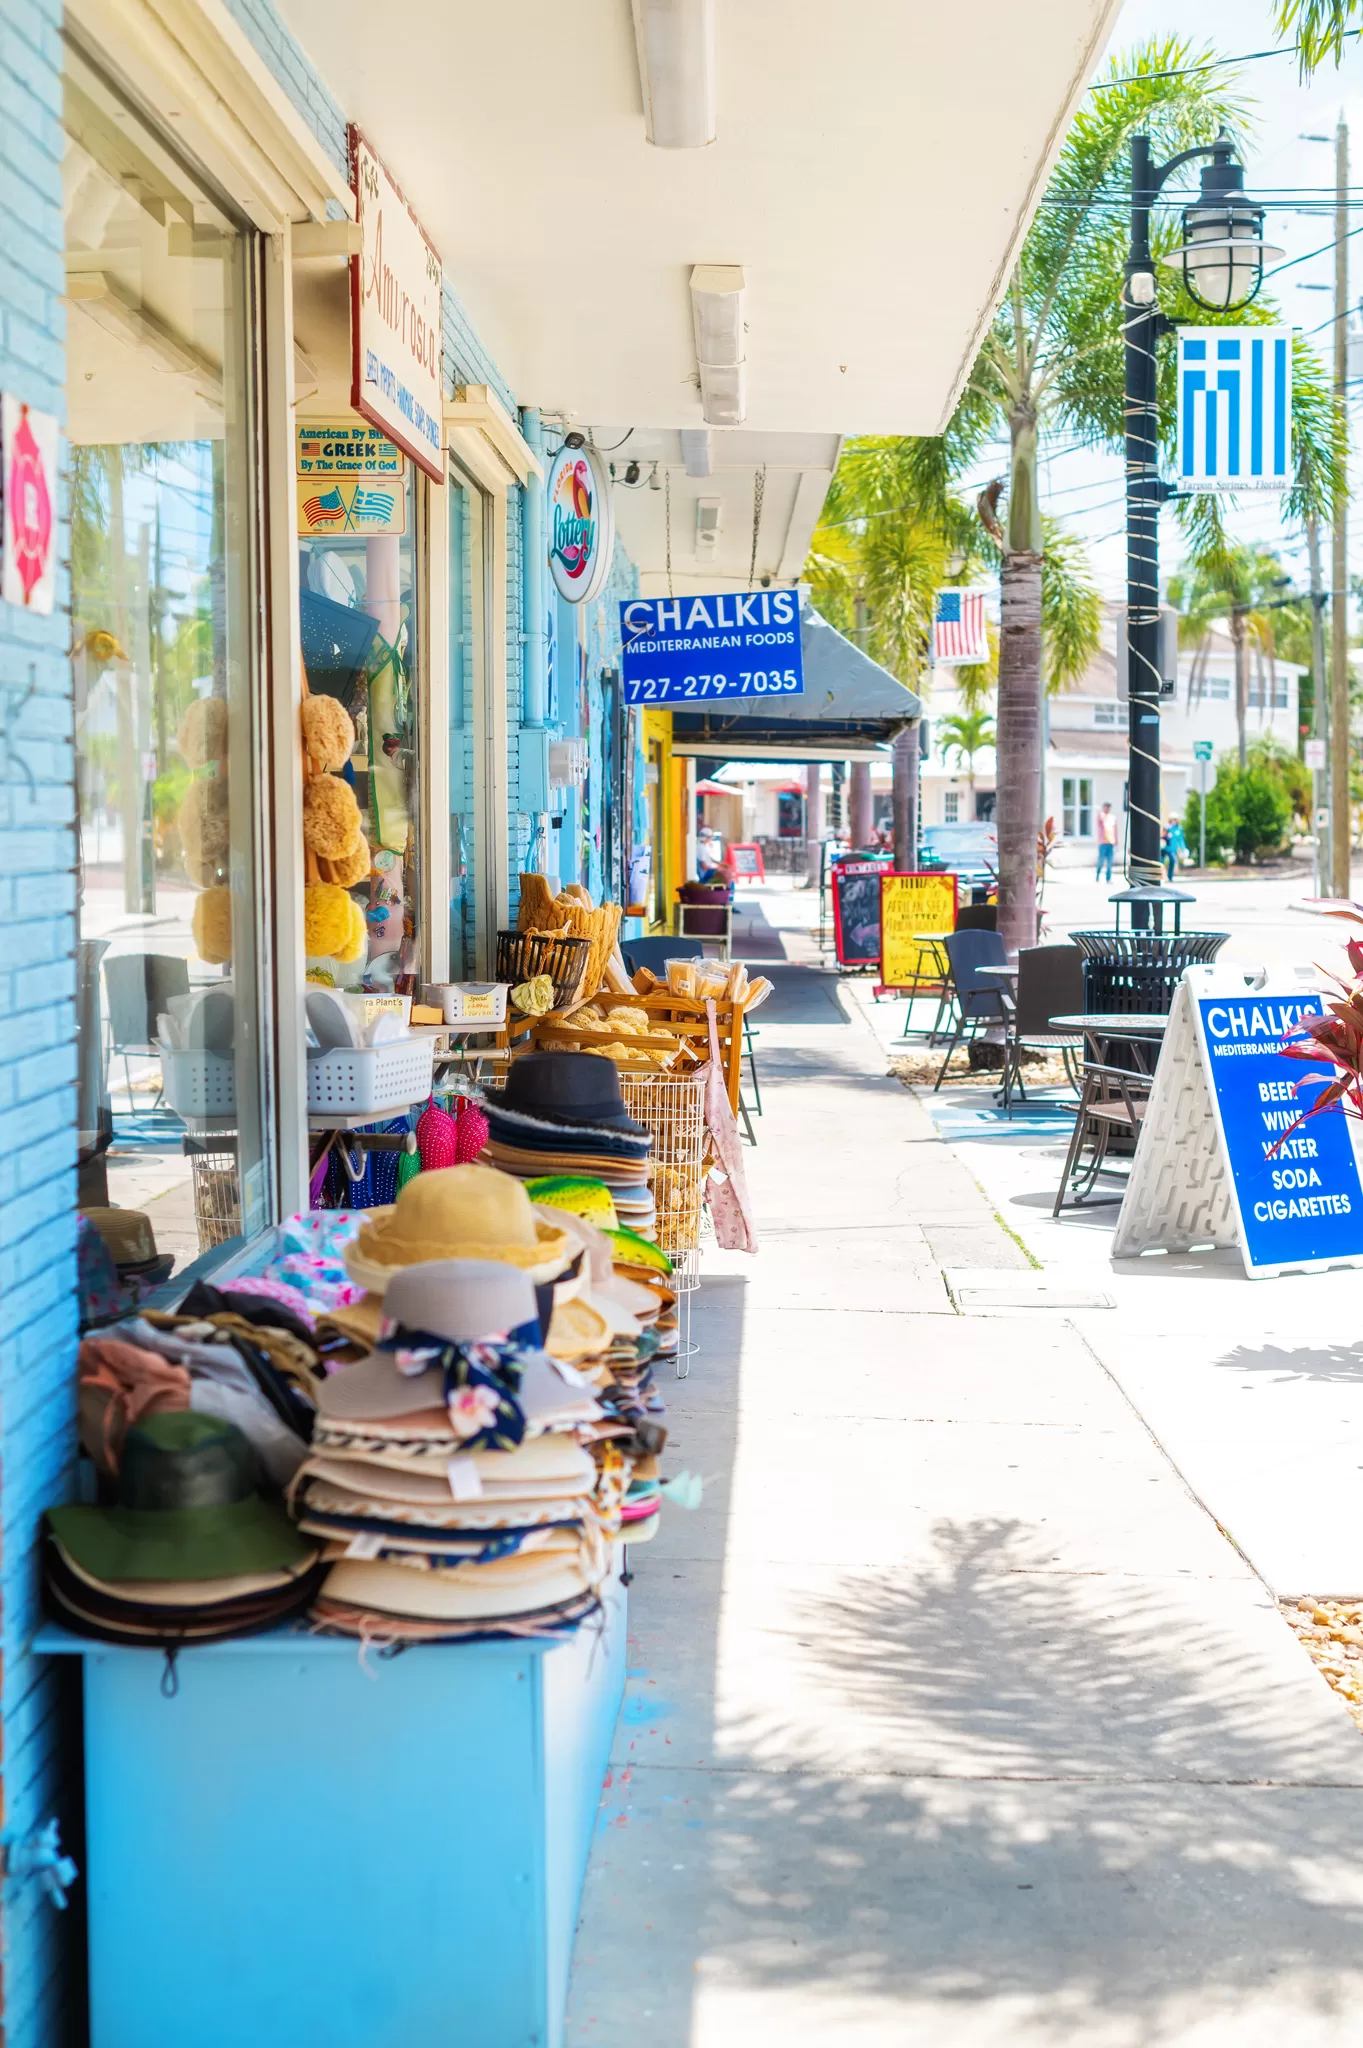 This image is for a blog post about Tarpon Springs Florida and shows some Greek shops near the Sponge Docks